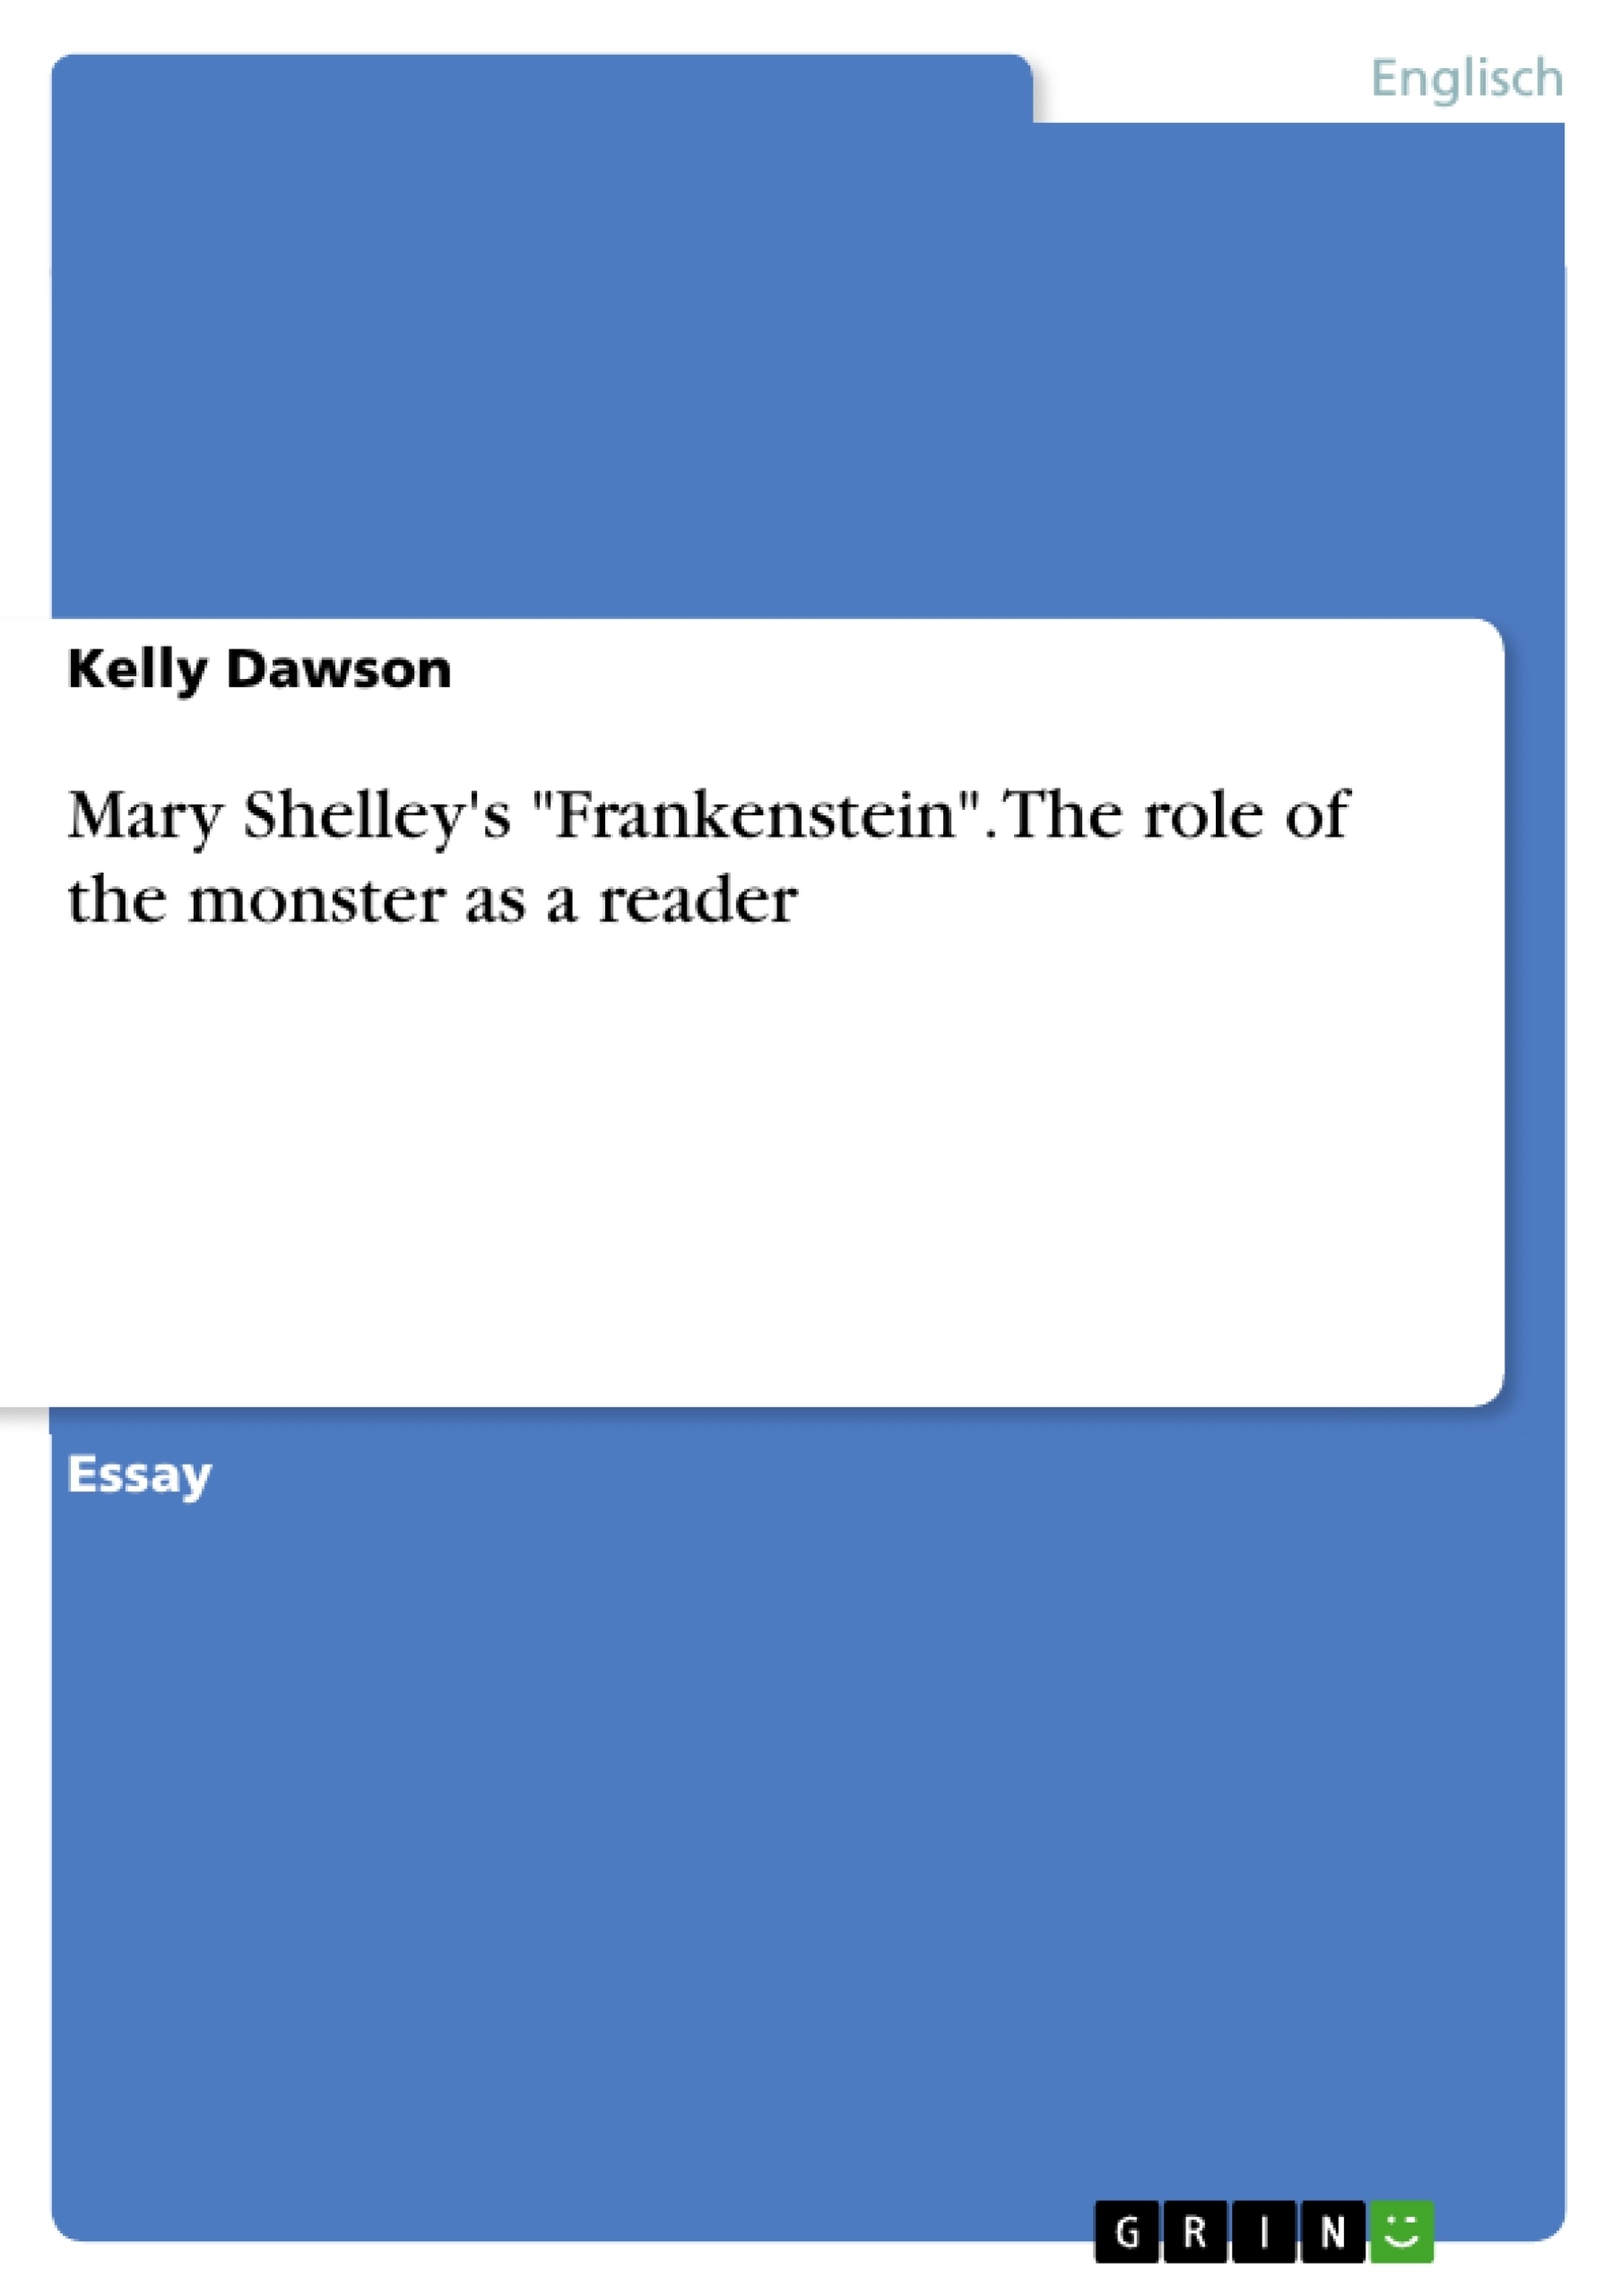 Titel: Mary Shelley's "Frankenstein". The role of the monster as a reader